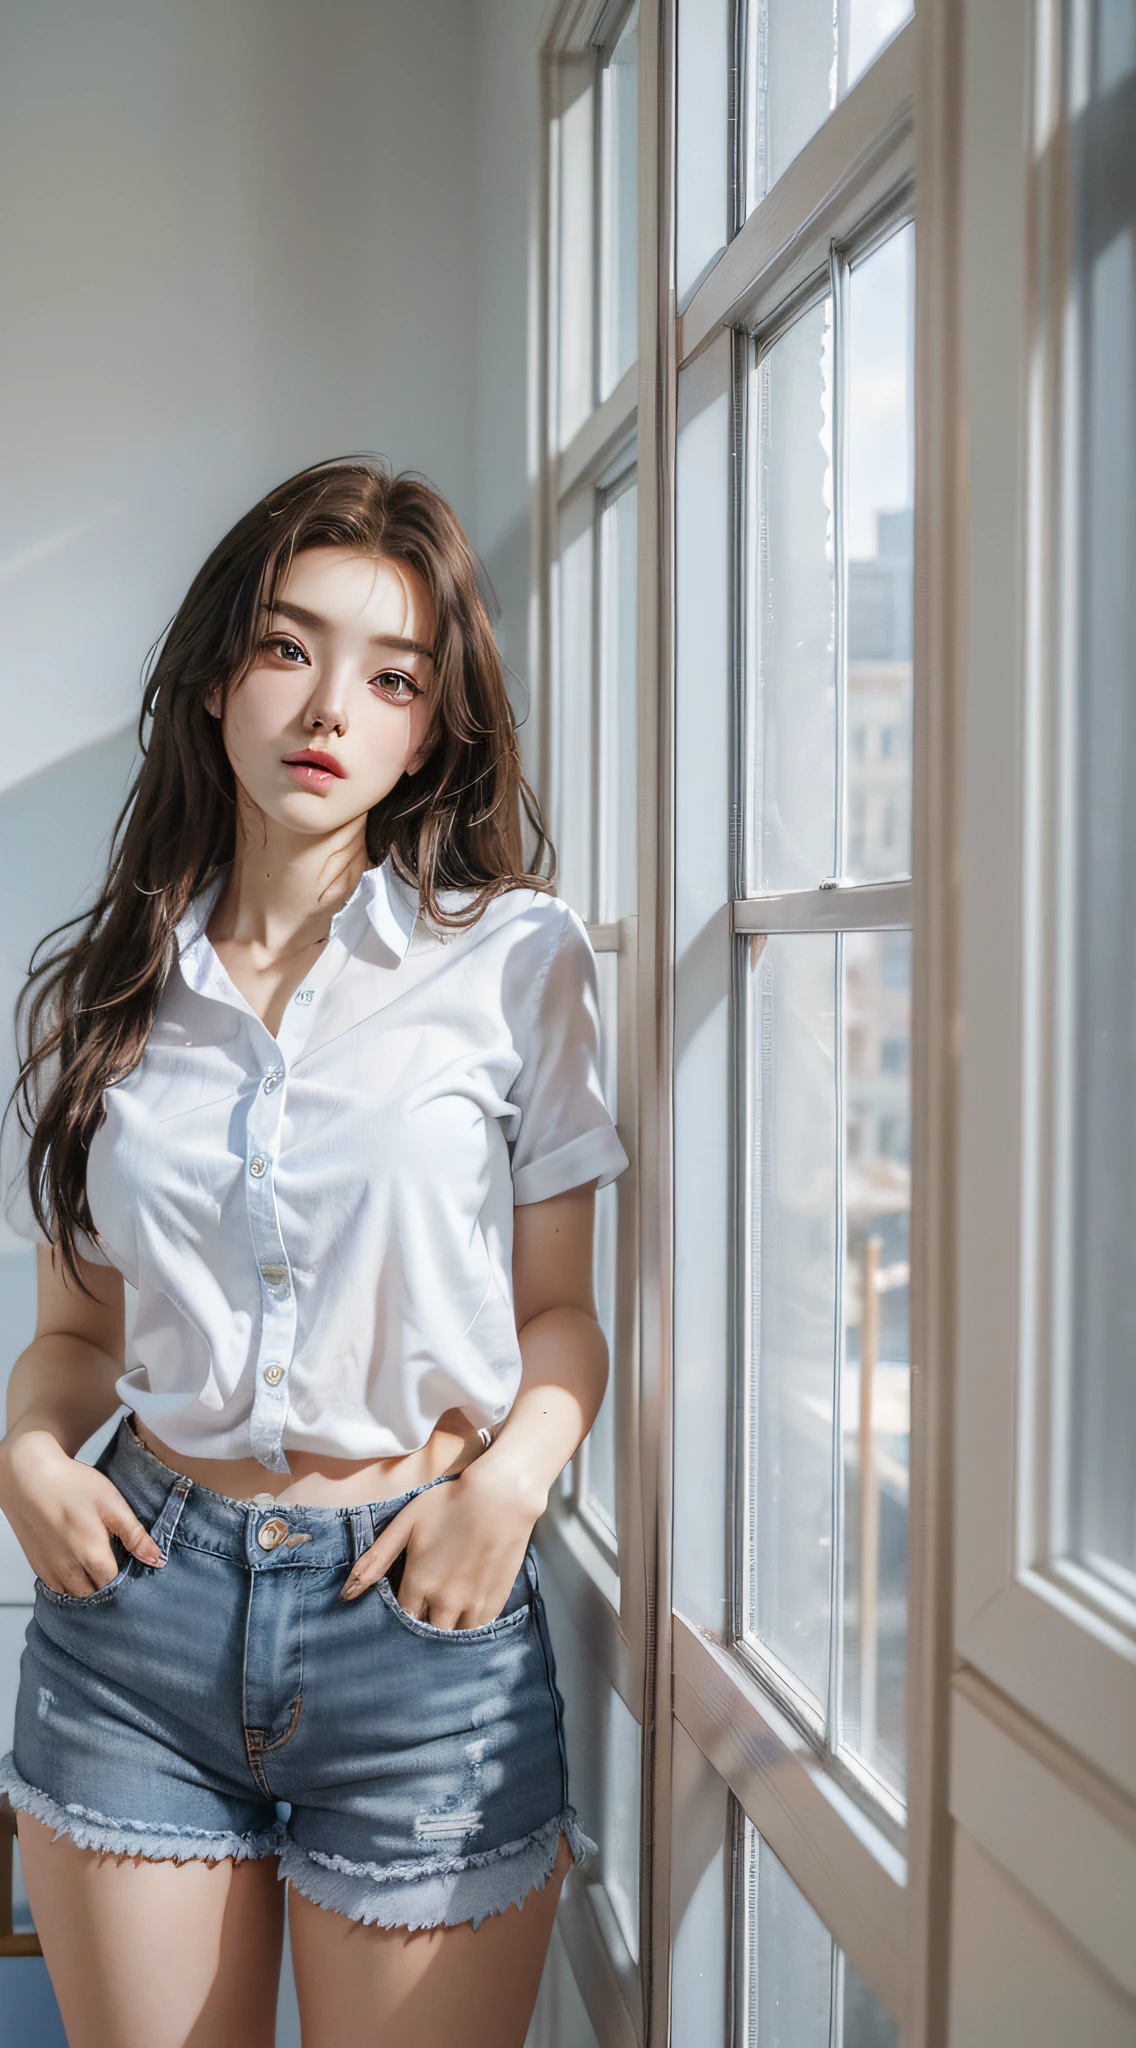 4k perfect quality, highly detailed realistic ((full body including legs)) beautiful photo of 18 year old Anglo-Saxon sweaty girl, ((perfect delicate facial features)) and lively, (in white shirt blue denim shorts) standing in a tall building by the bedroom window, white wall